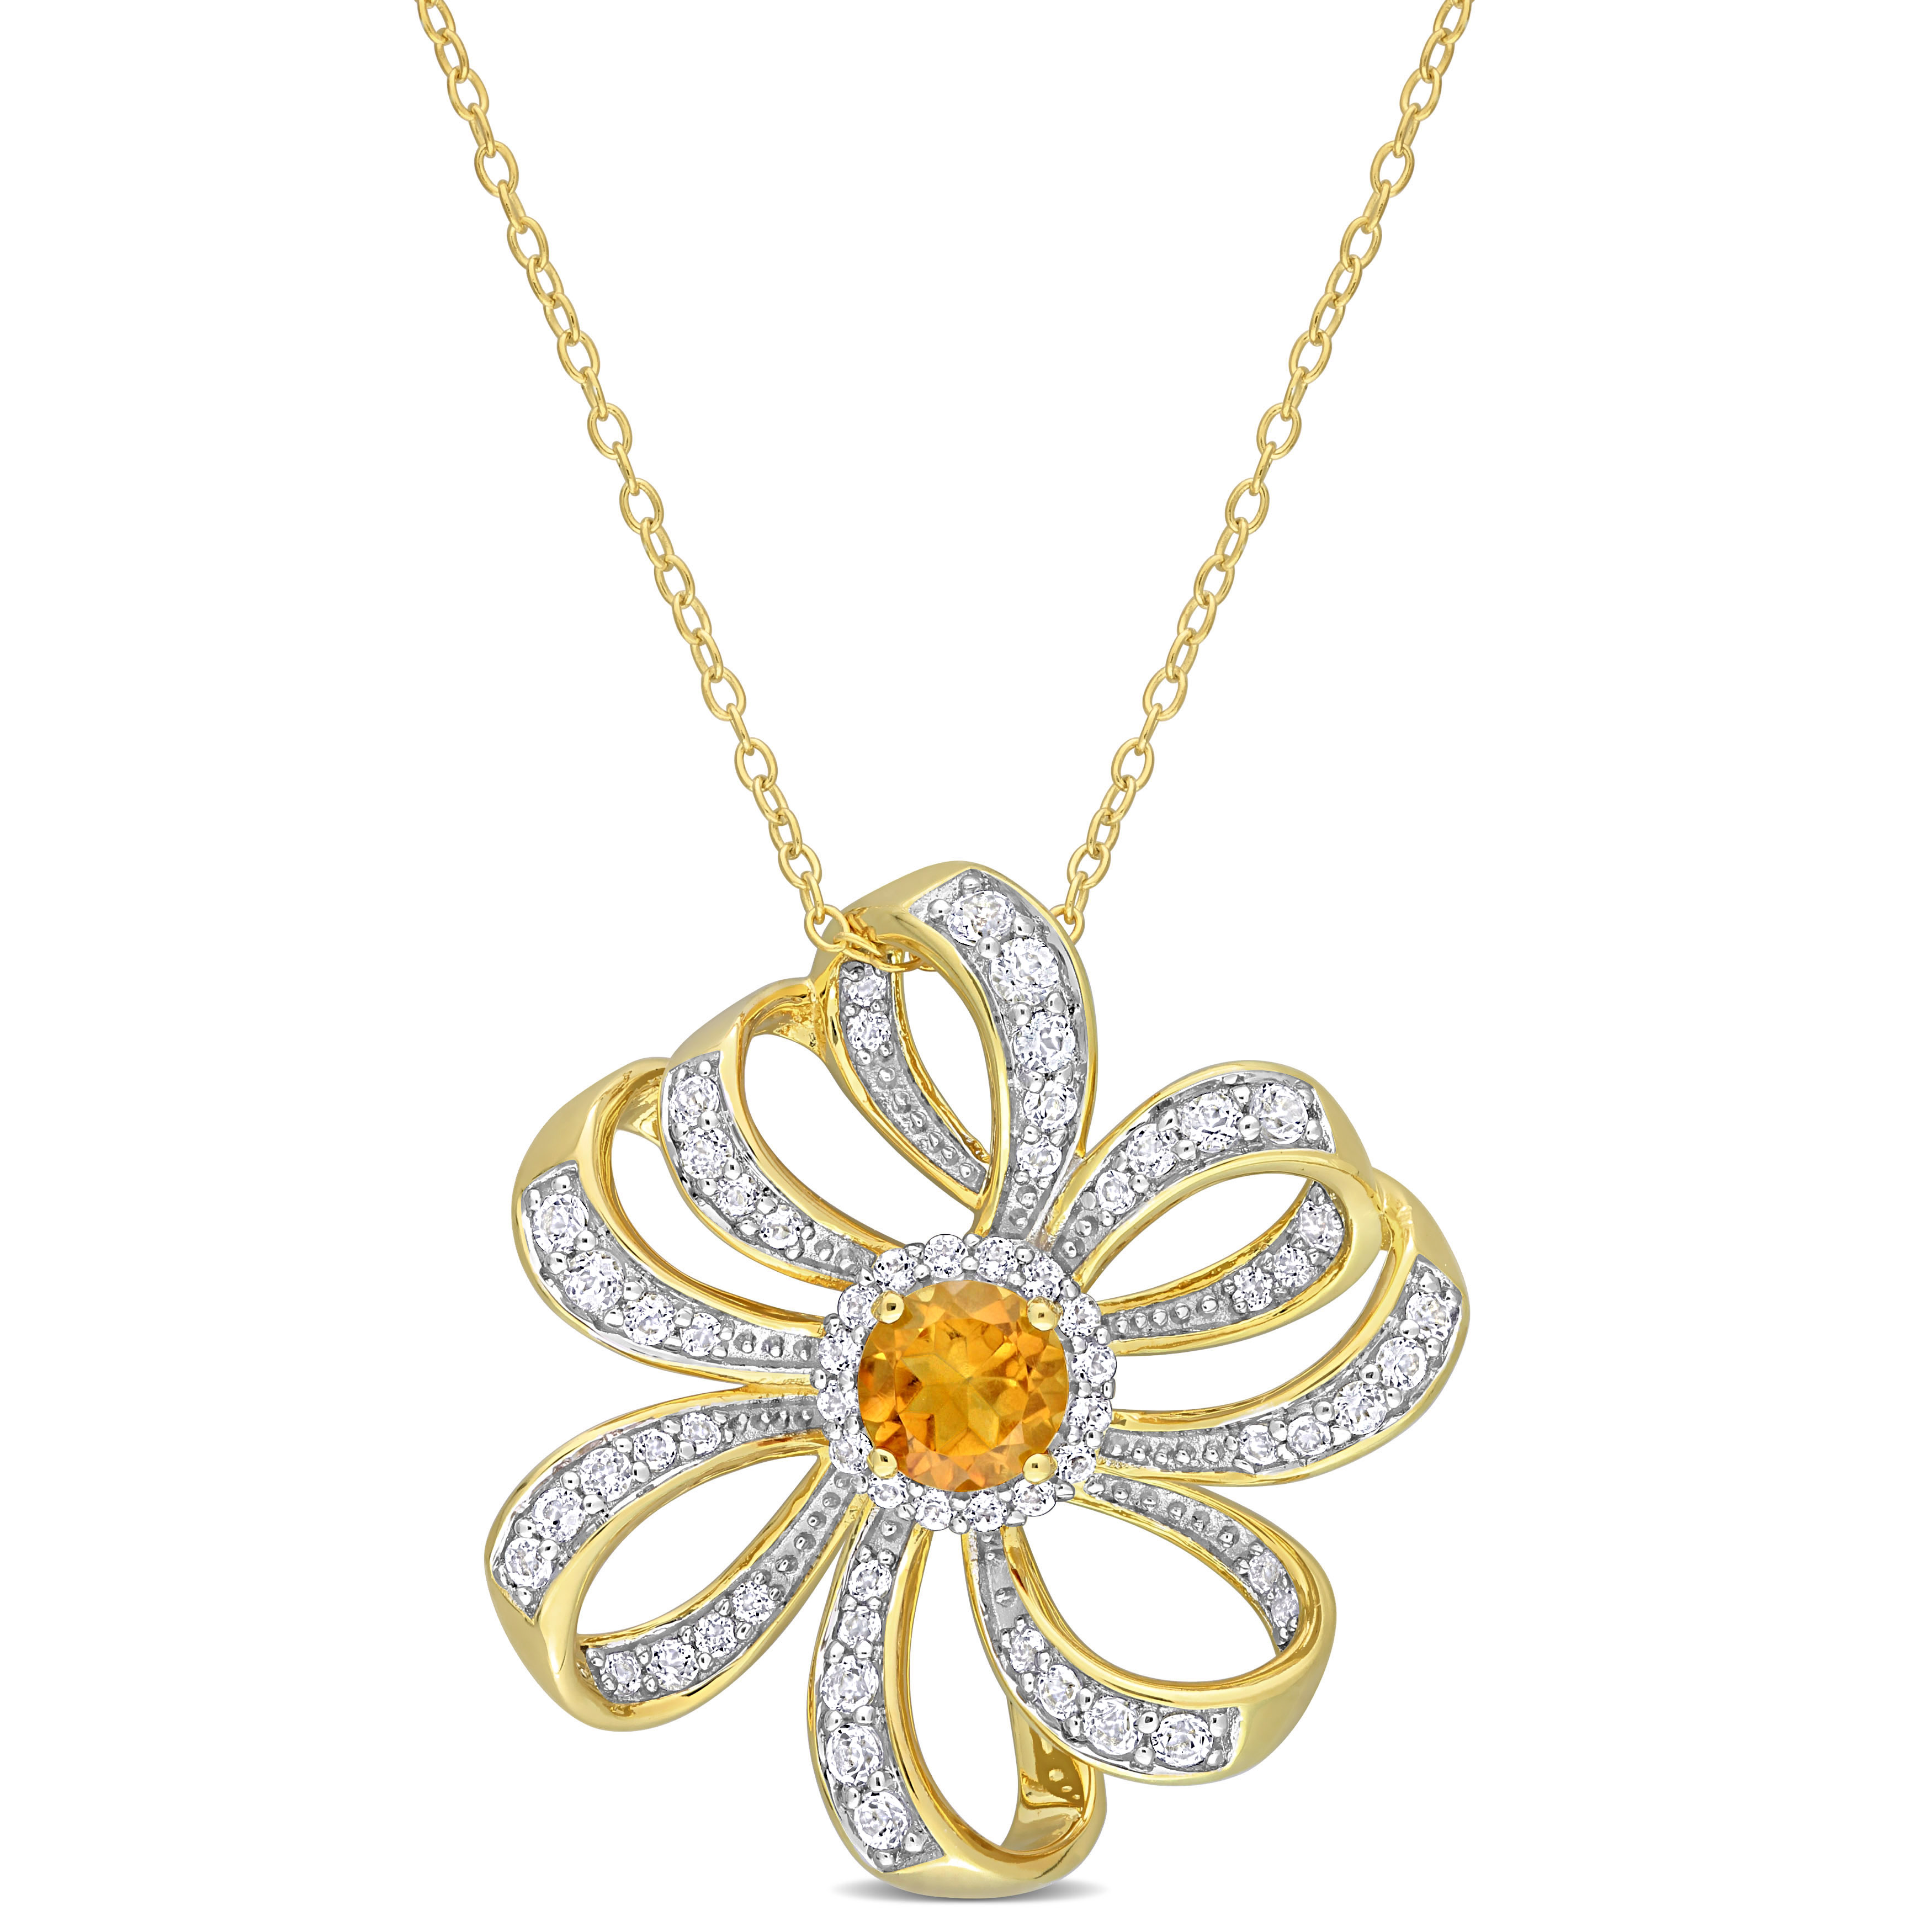 2 CT TGW Madeira Citrine and White Topaz Flower Pendant with Chain in 18k Yellow Gold Plated Sterling Silver